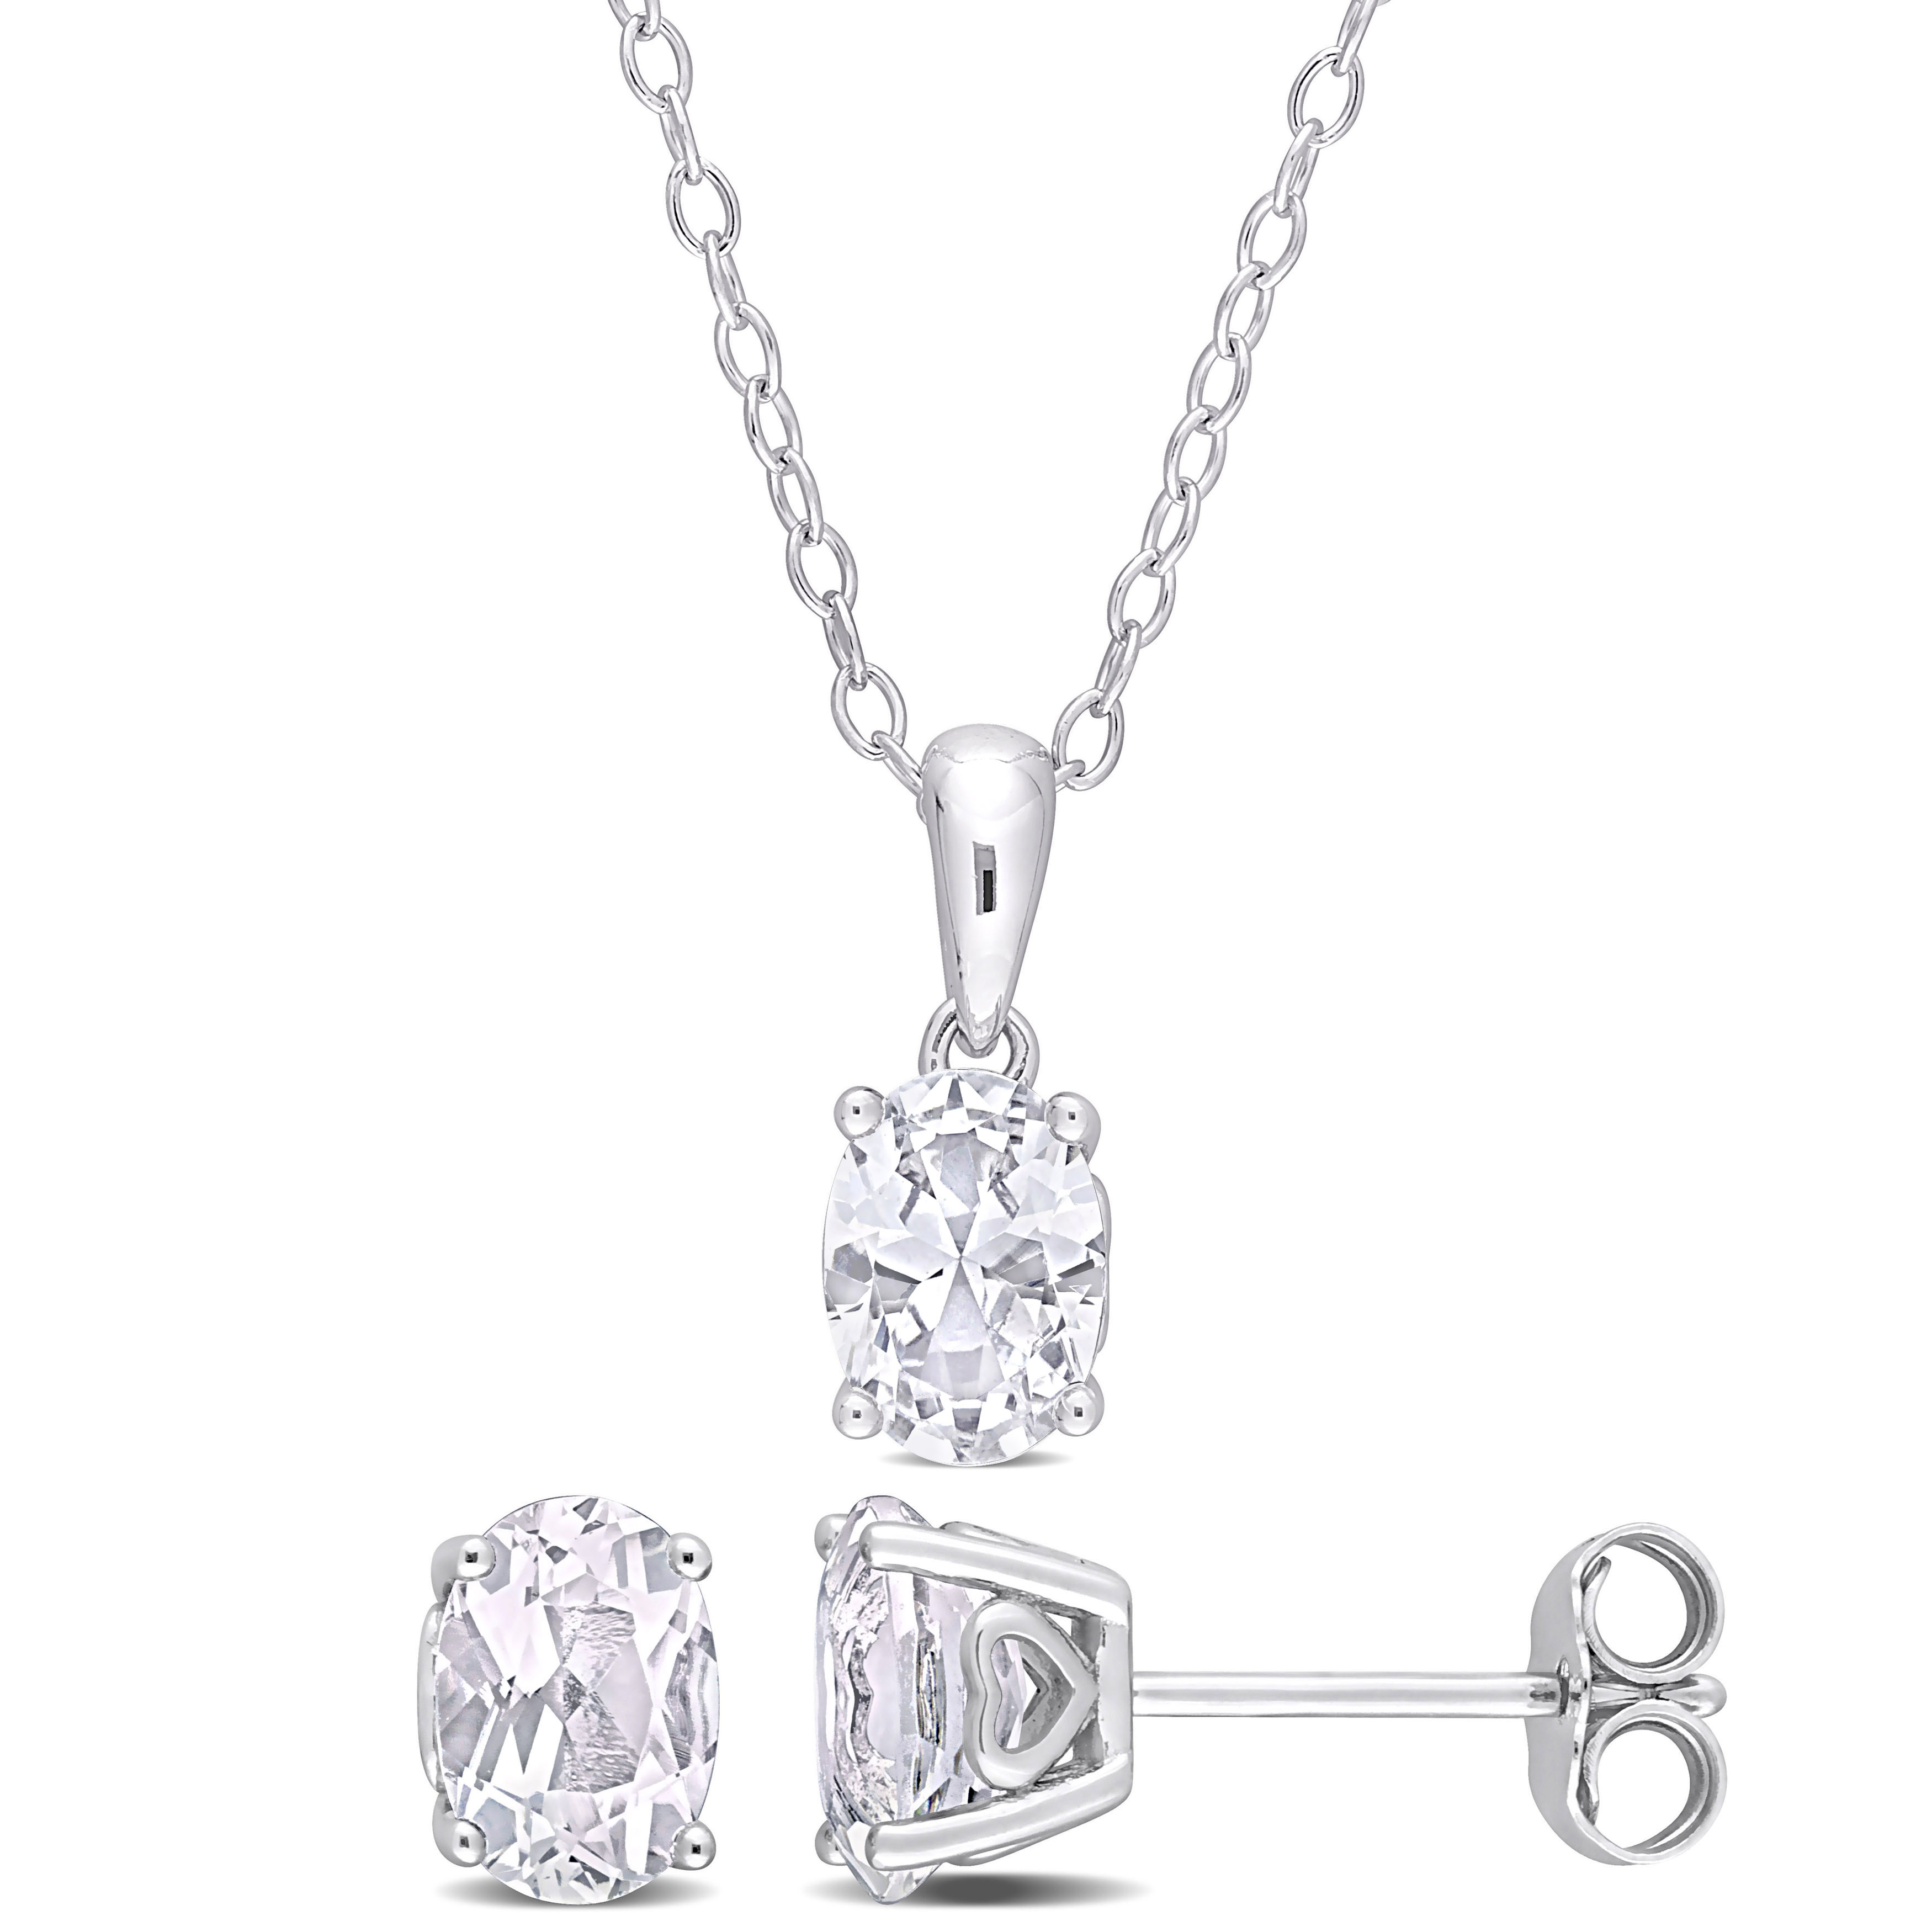 2 3/4 CT TGW Oval White Topaz 2-Piece Solitaire Pendant with Chain and Stud Earrings Set in Sterling Silver